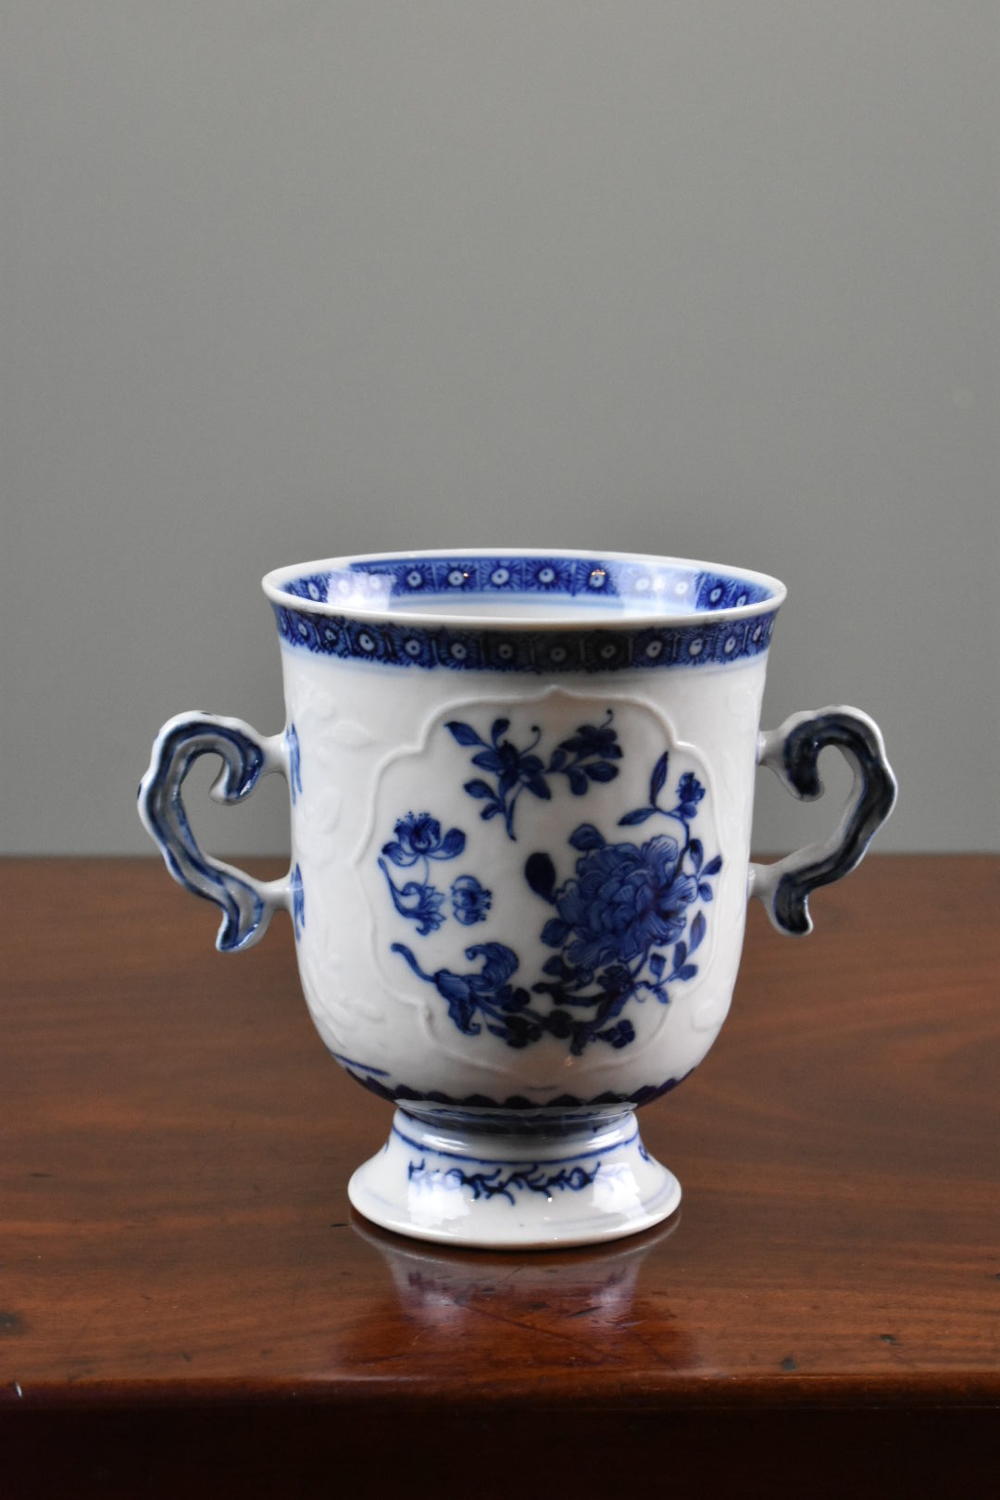 18th century double-handled Chinese cup